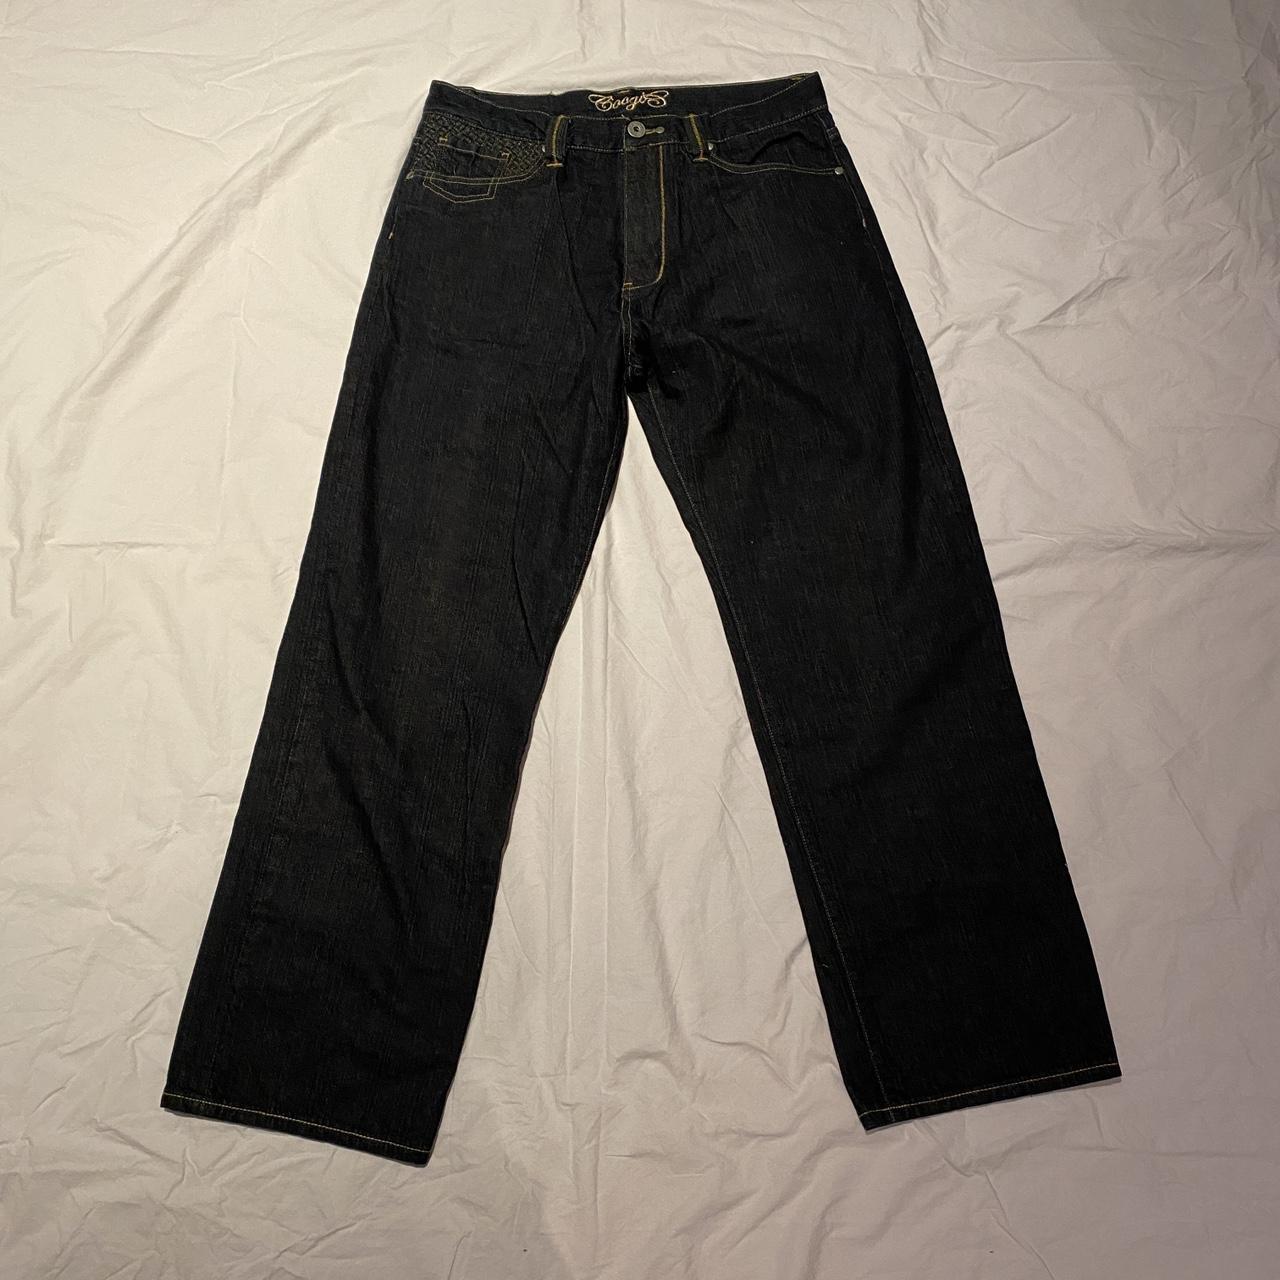 Coogi Men's Black and Navy Jeans (2)